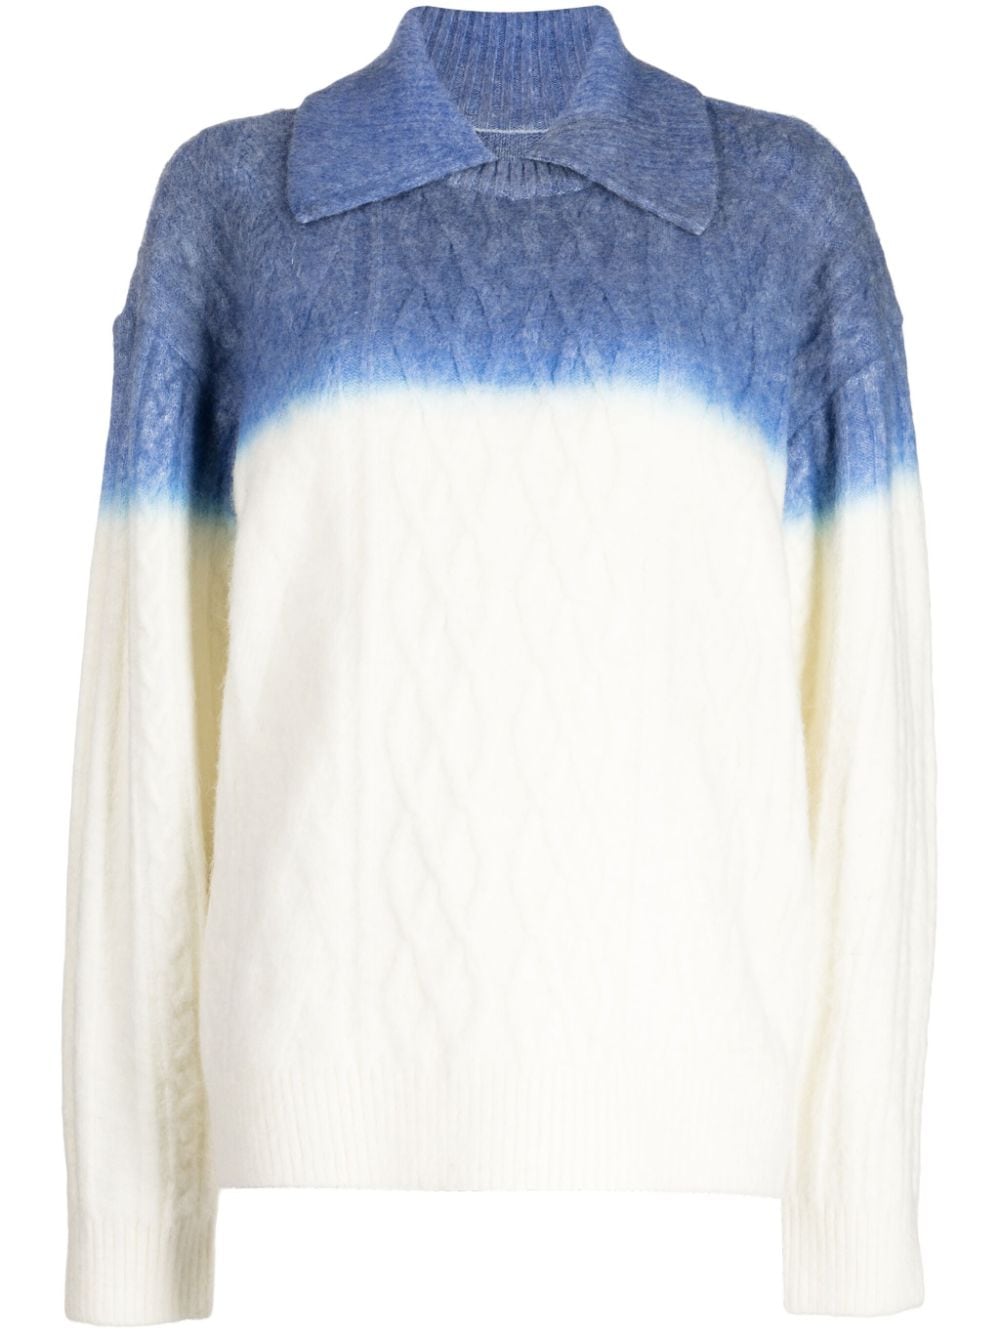 Ader Error Rowy Garment-dyed Knitted Jumper In Blue